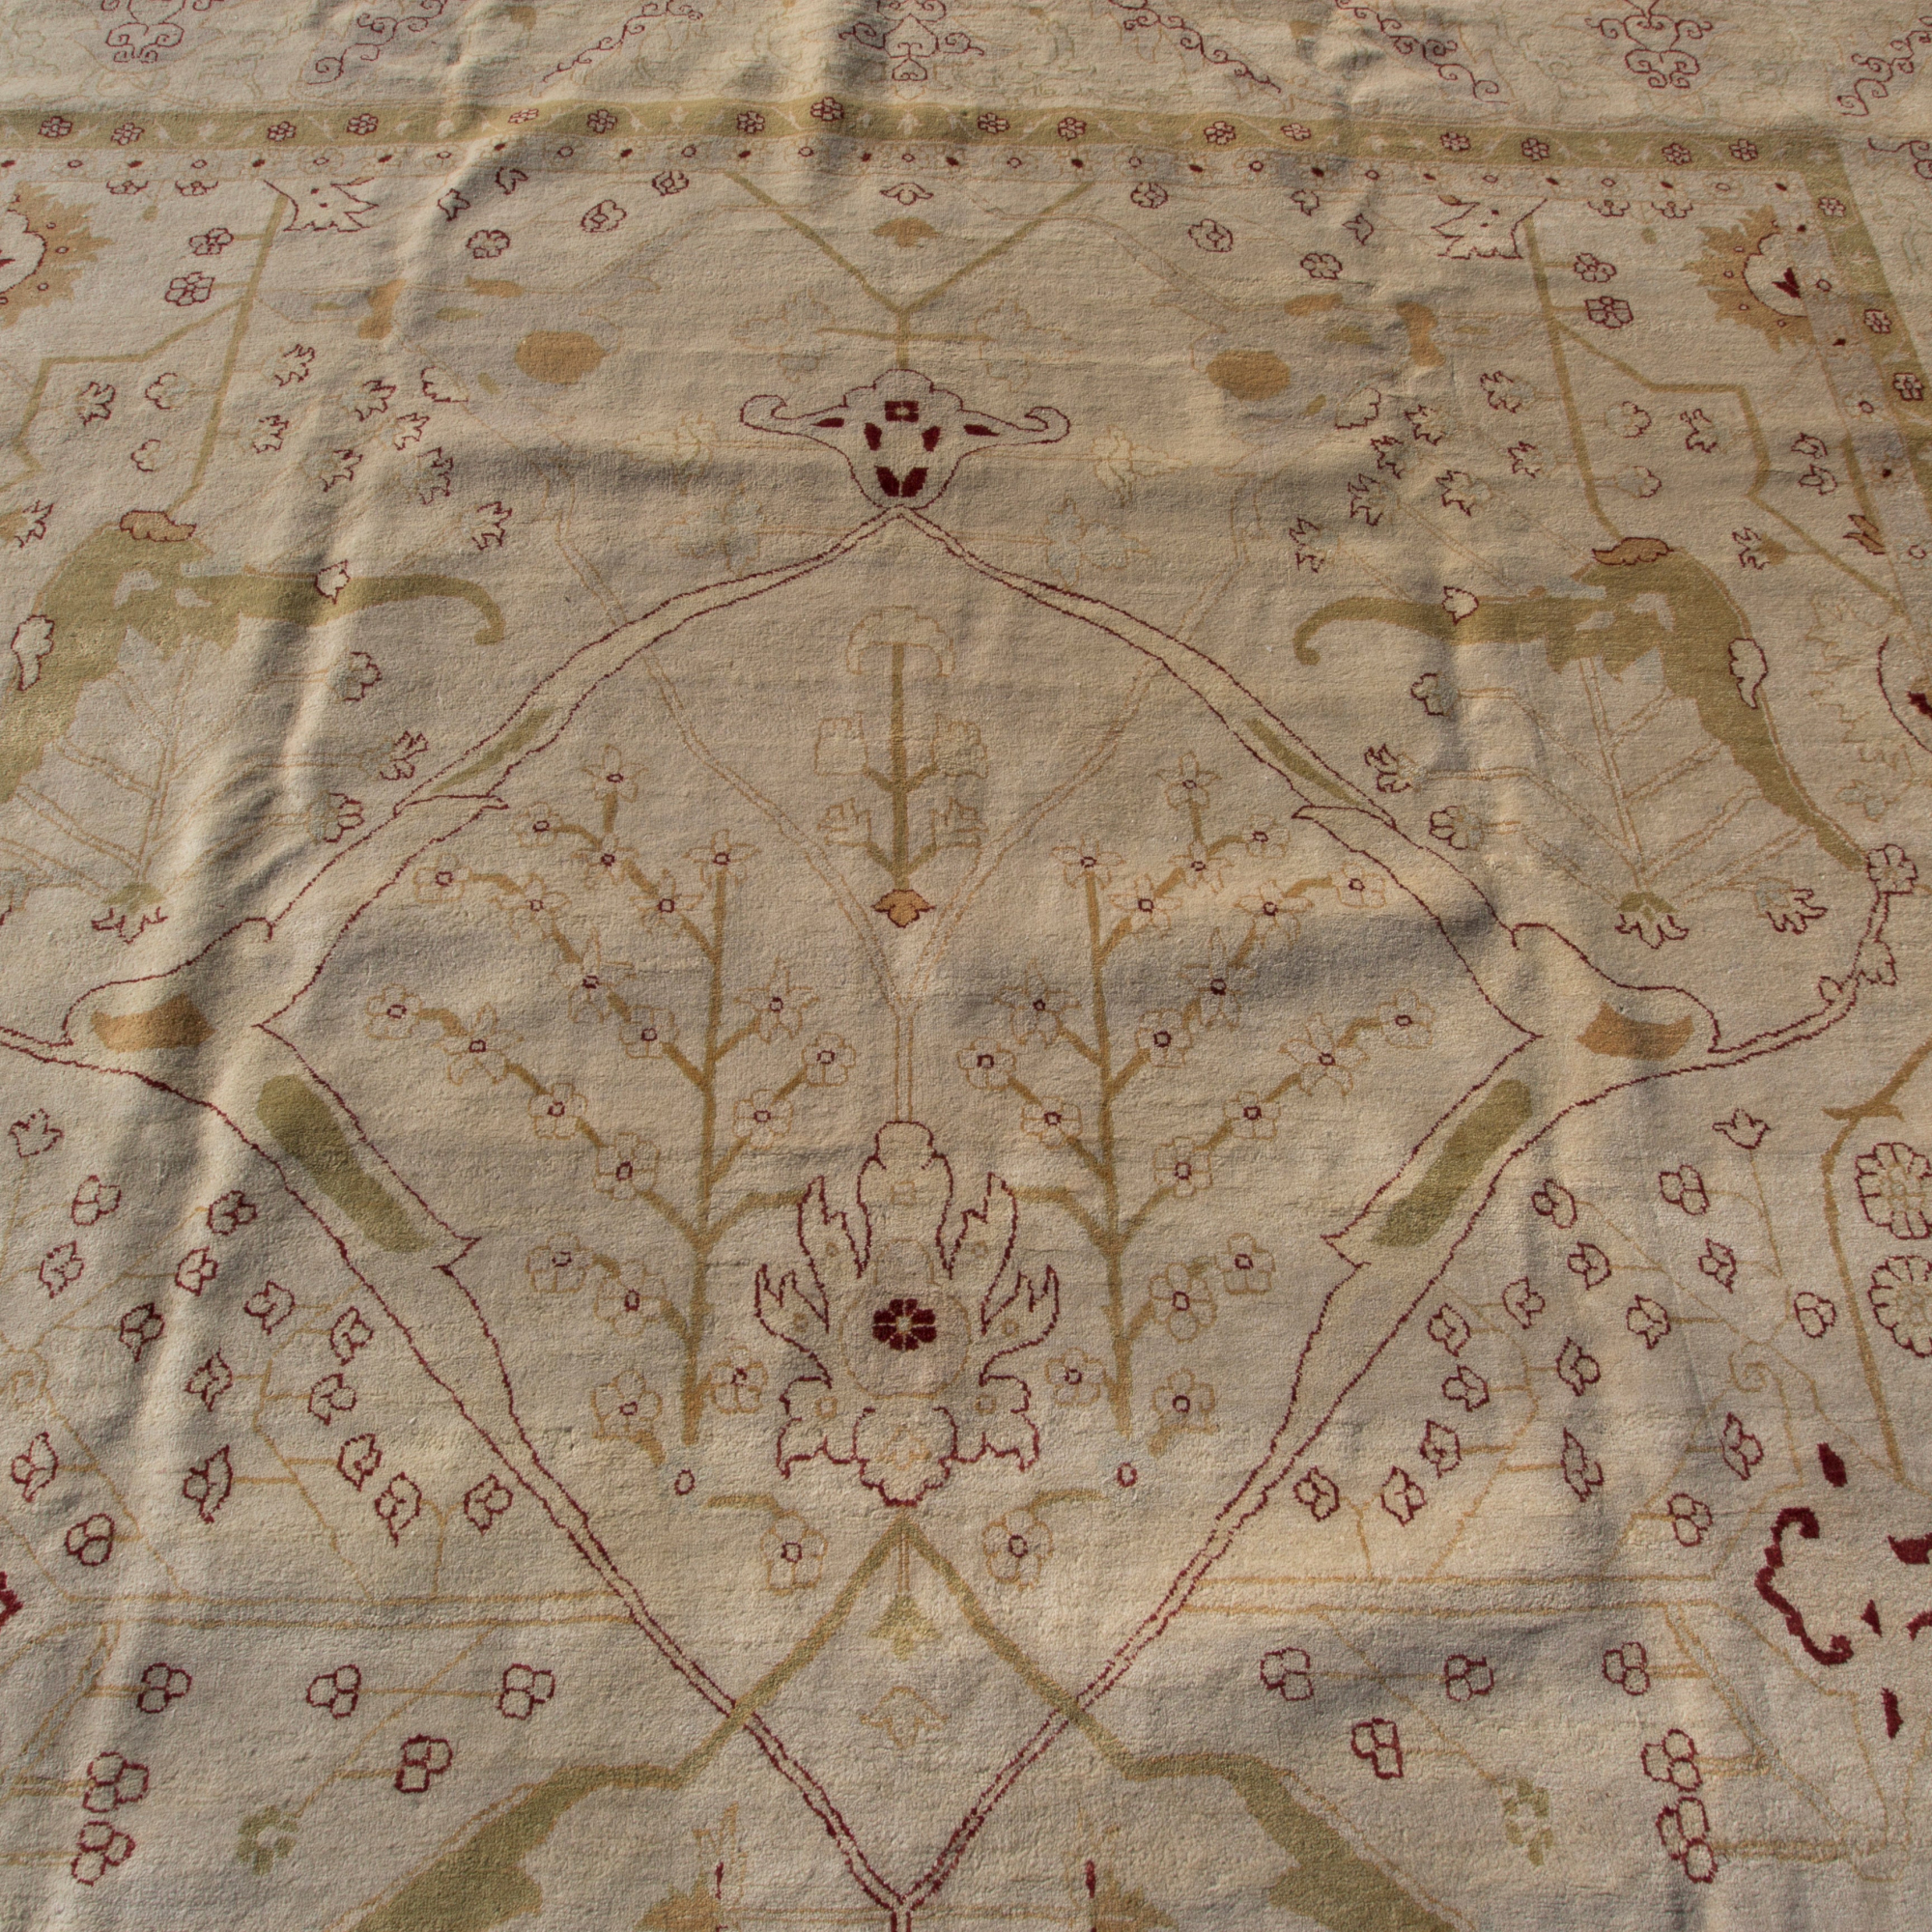 Area rug for living space and any room. Floor decor, rugs and carpets from Tabrizi Rugs. Oushak fine wool 12'0